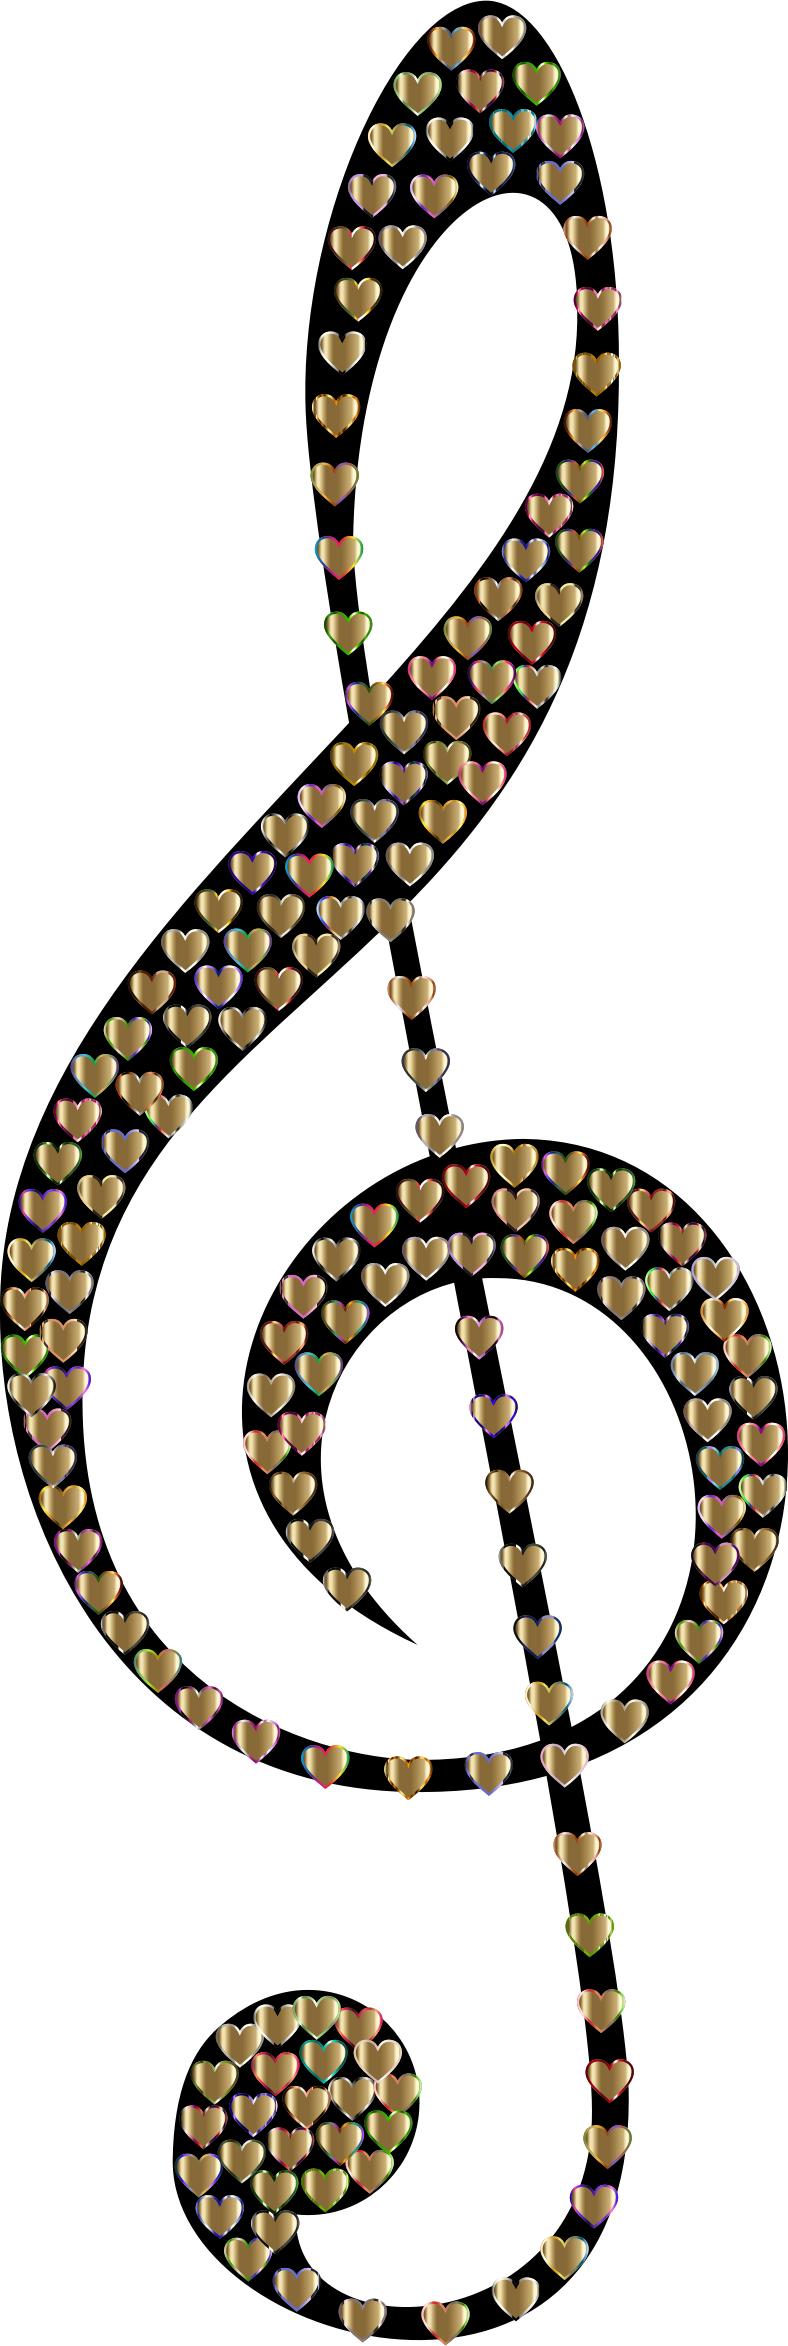 Prismatic Clef Hearts 9 png